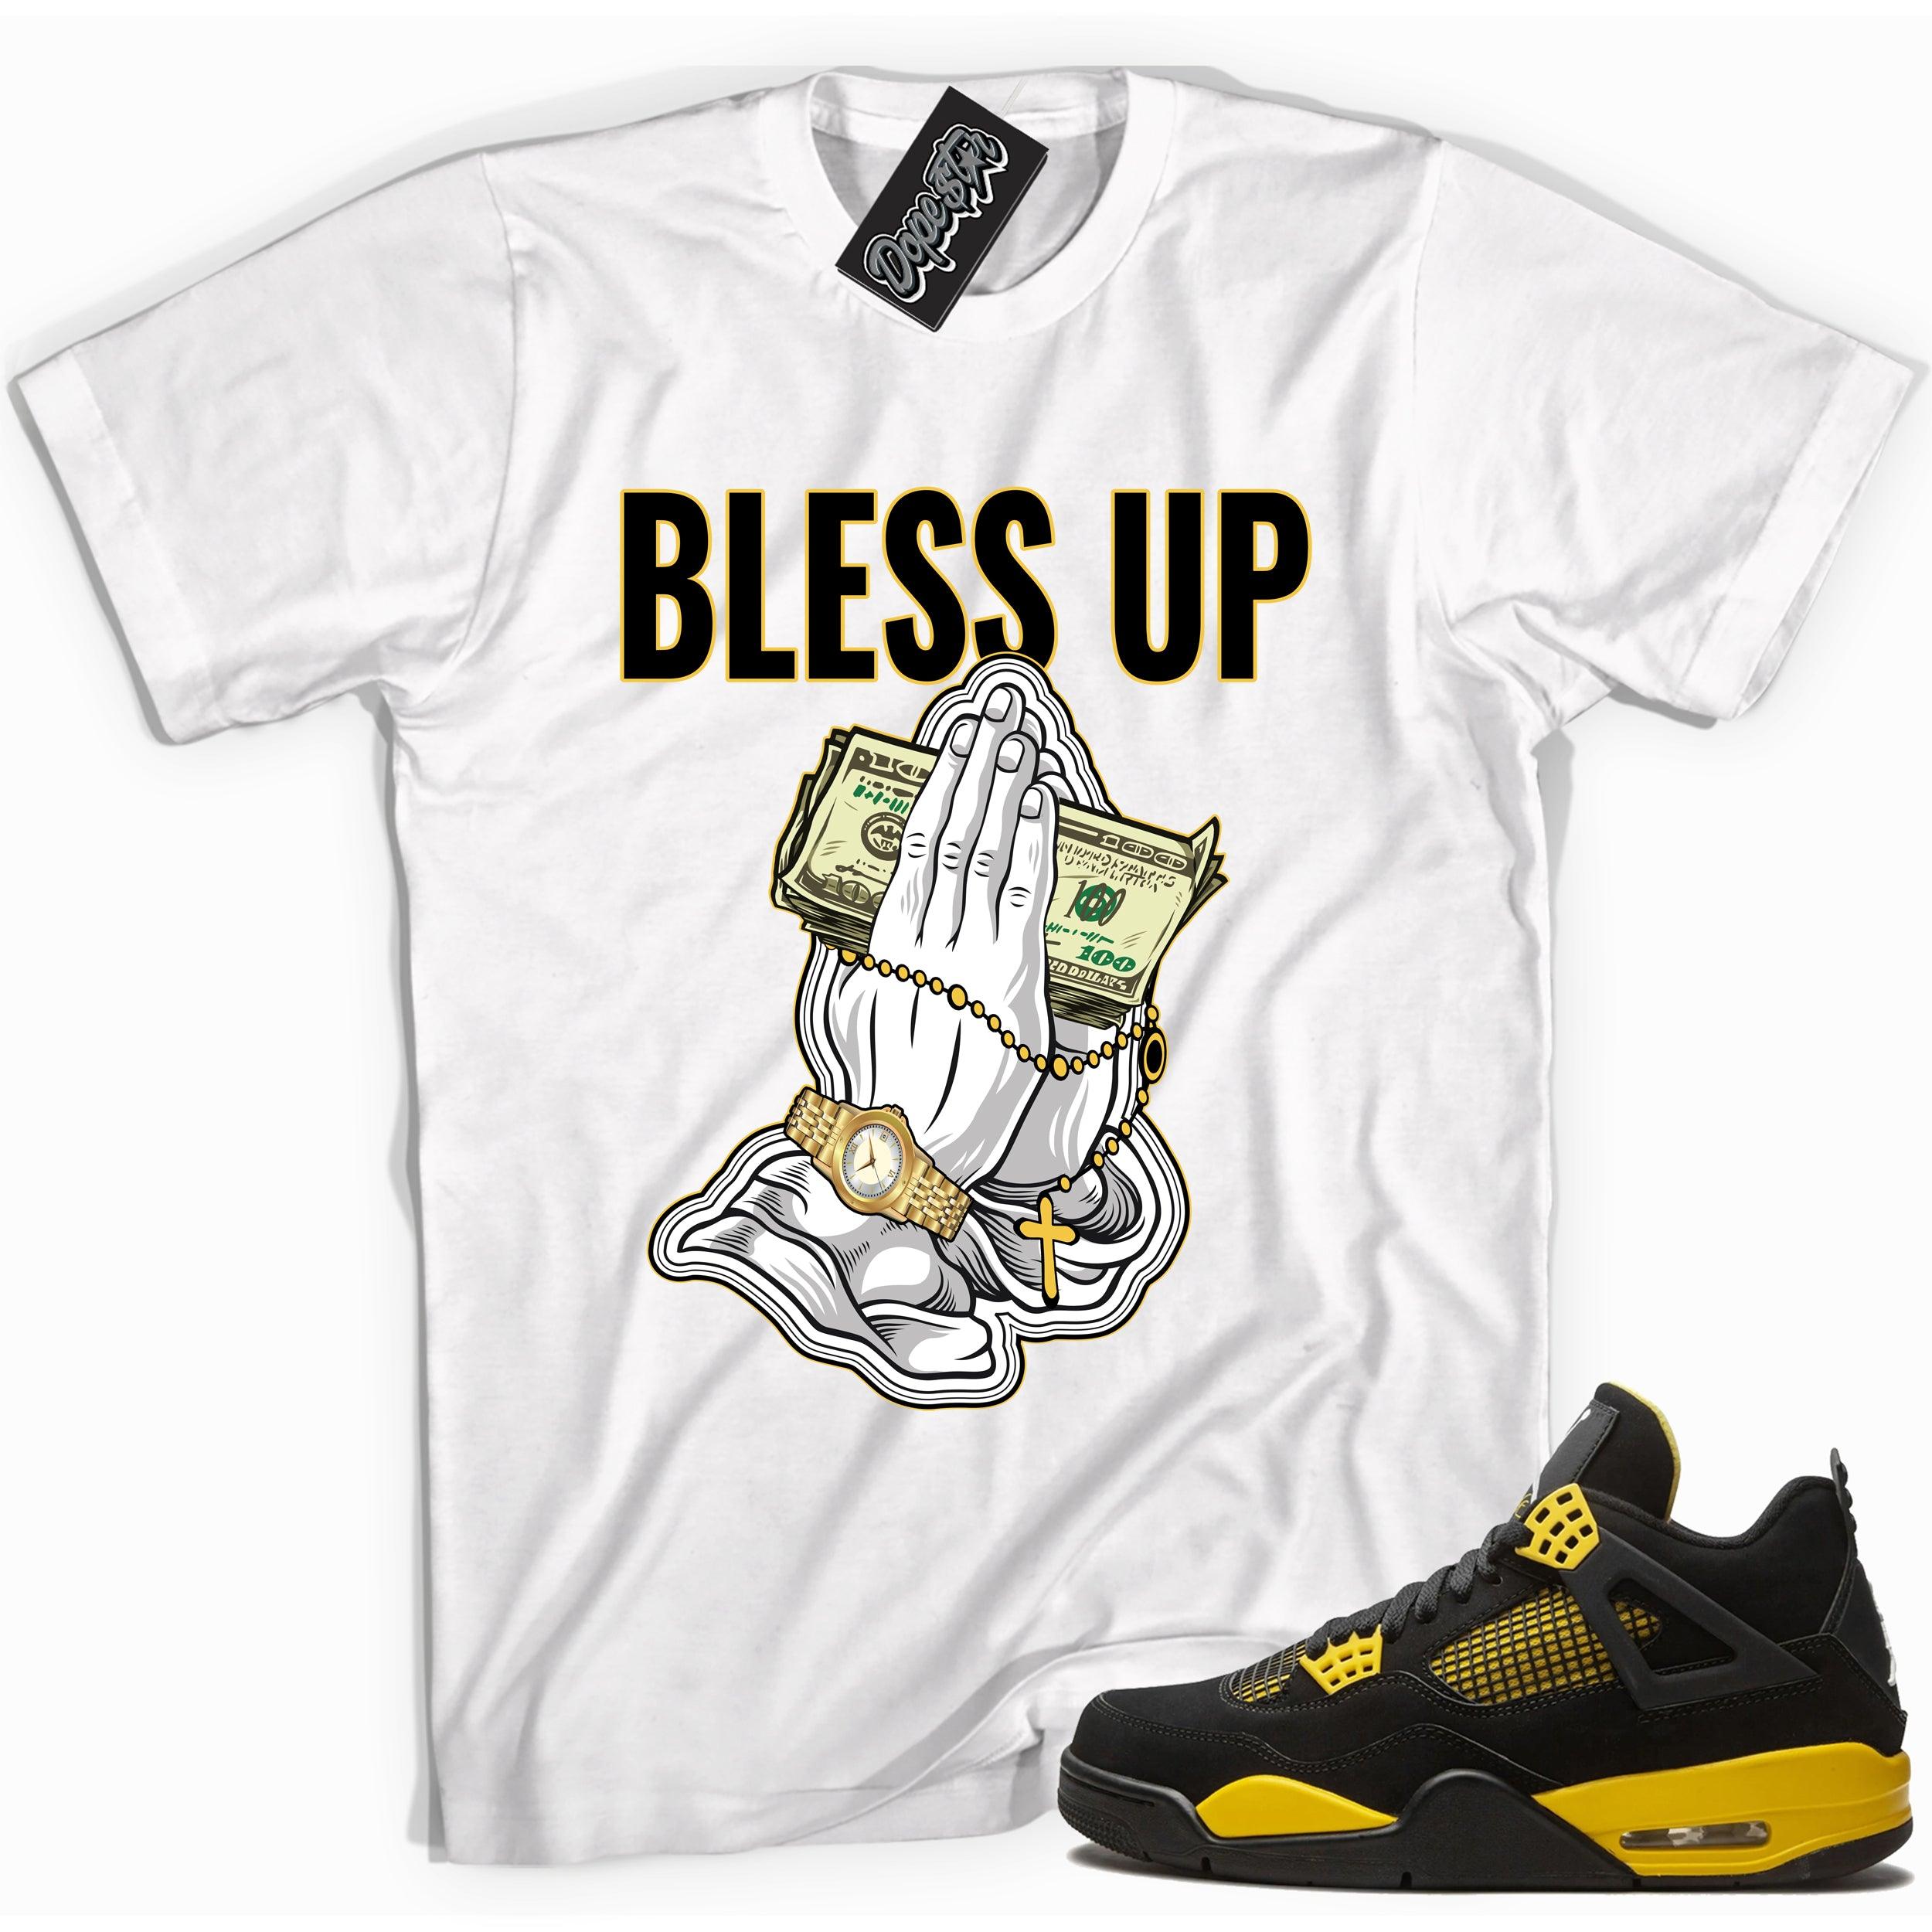 Cool white graphic tee with 'bless up' print, that perfectly matches Air Jordan 4 Thunder sneakers